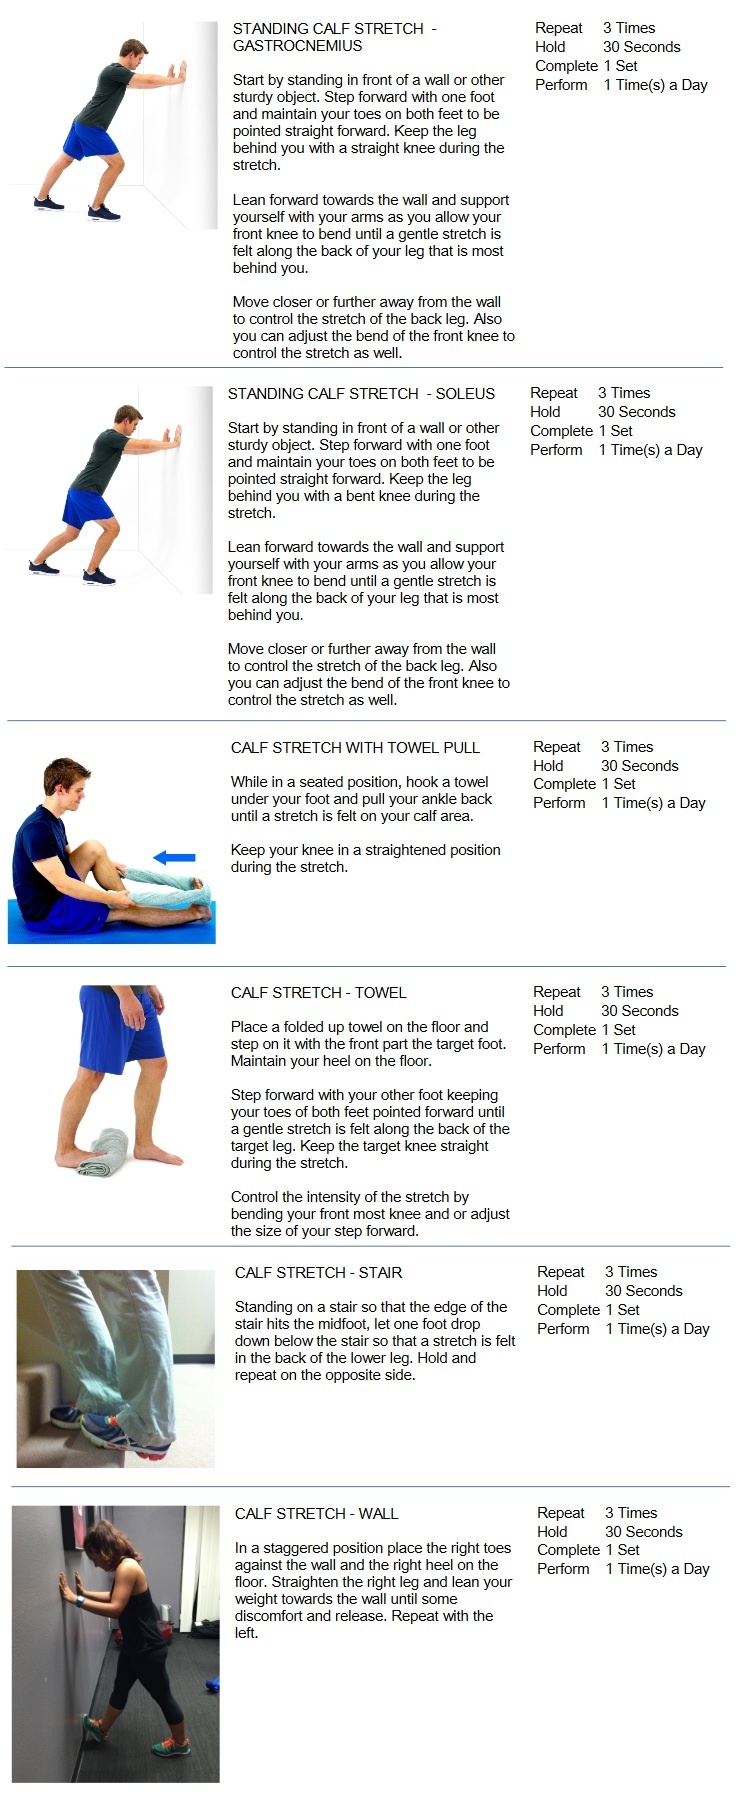 Calf Stretch - Home Exercise Blog - First Line Physiotherapy